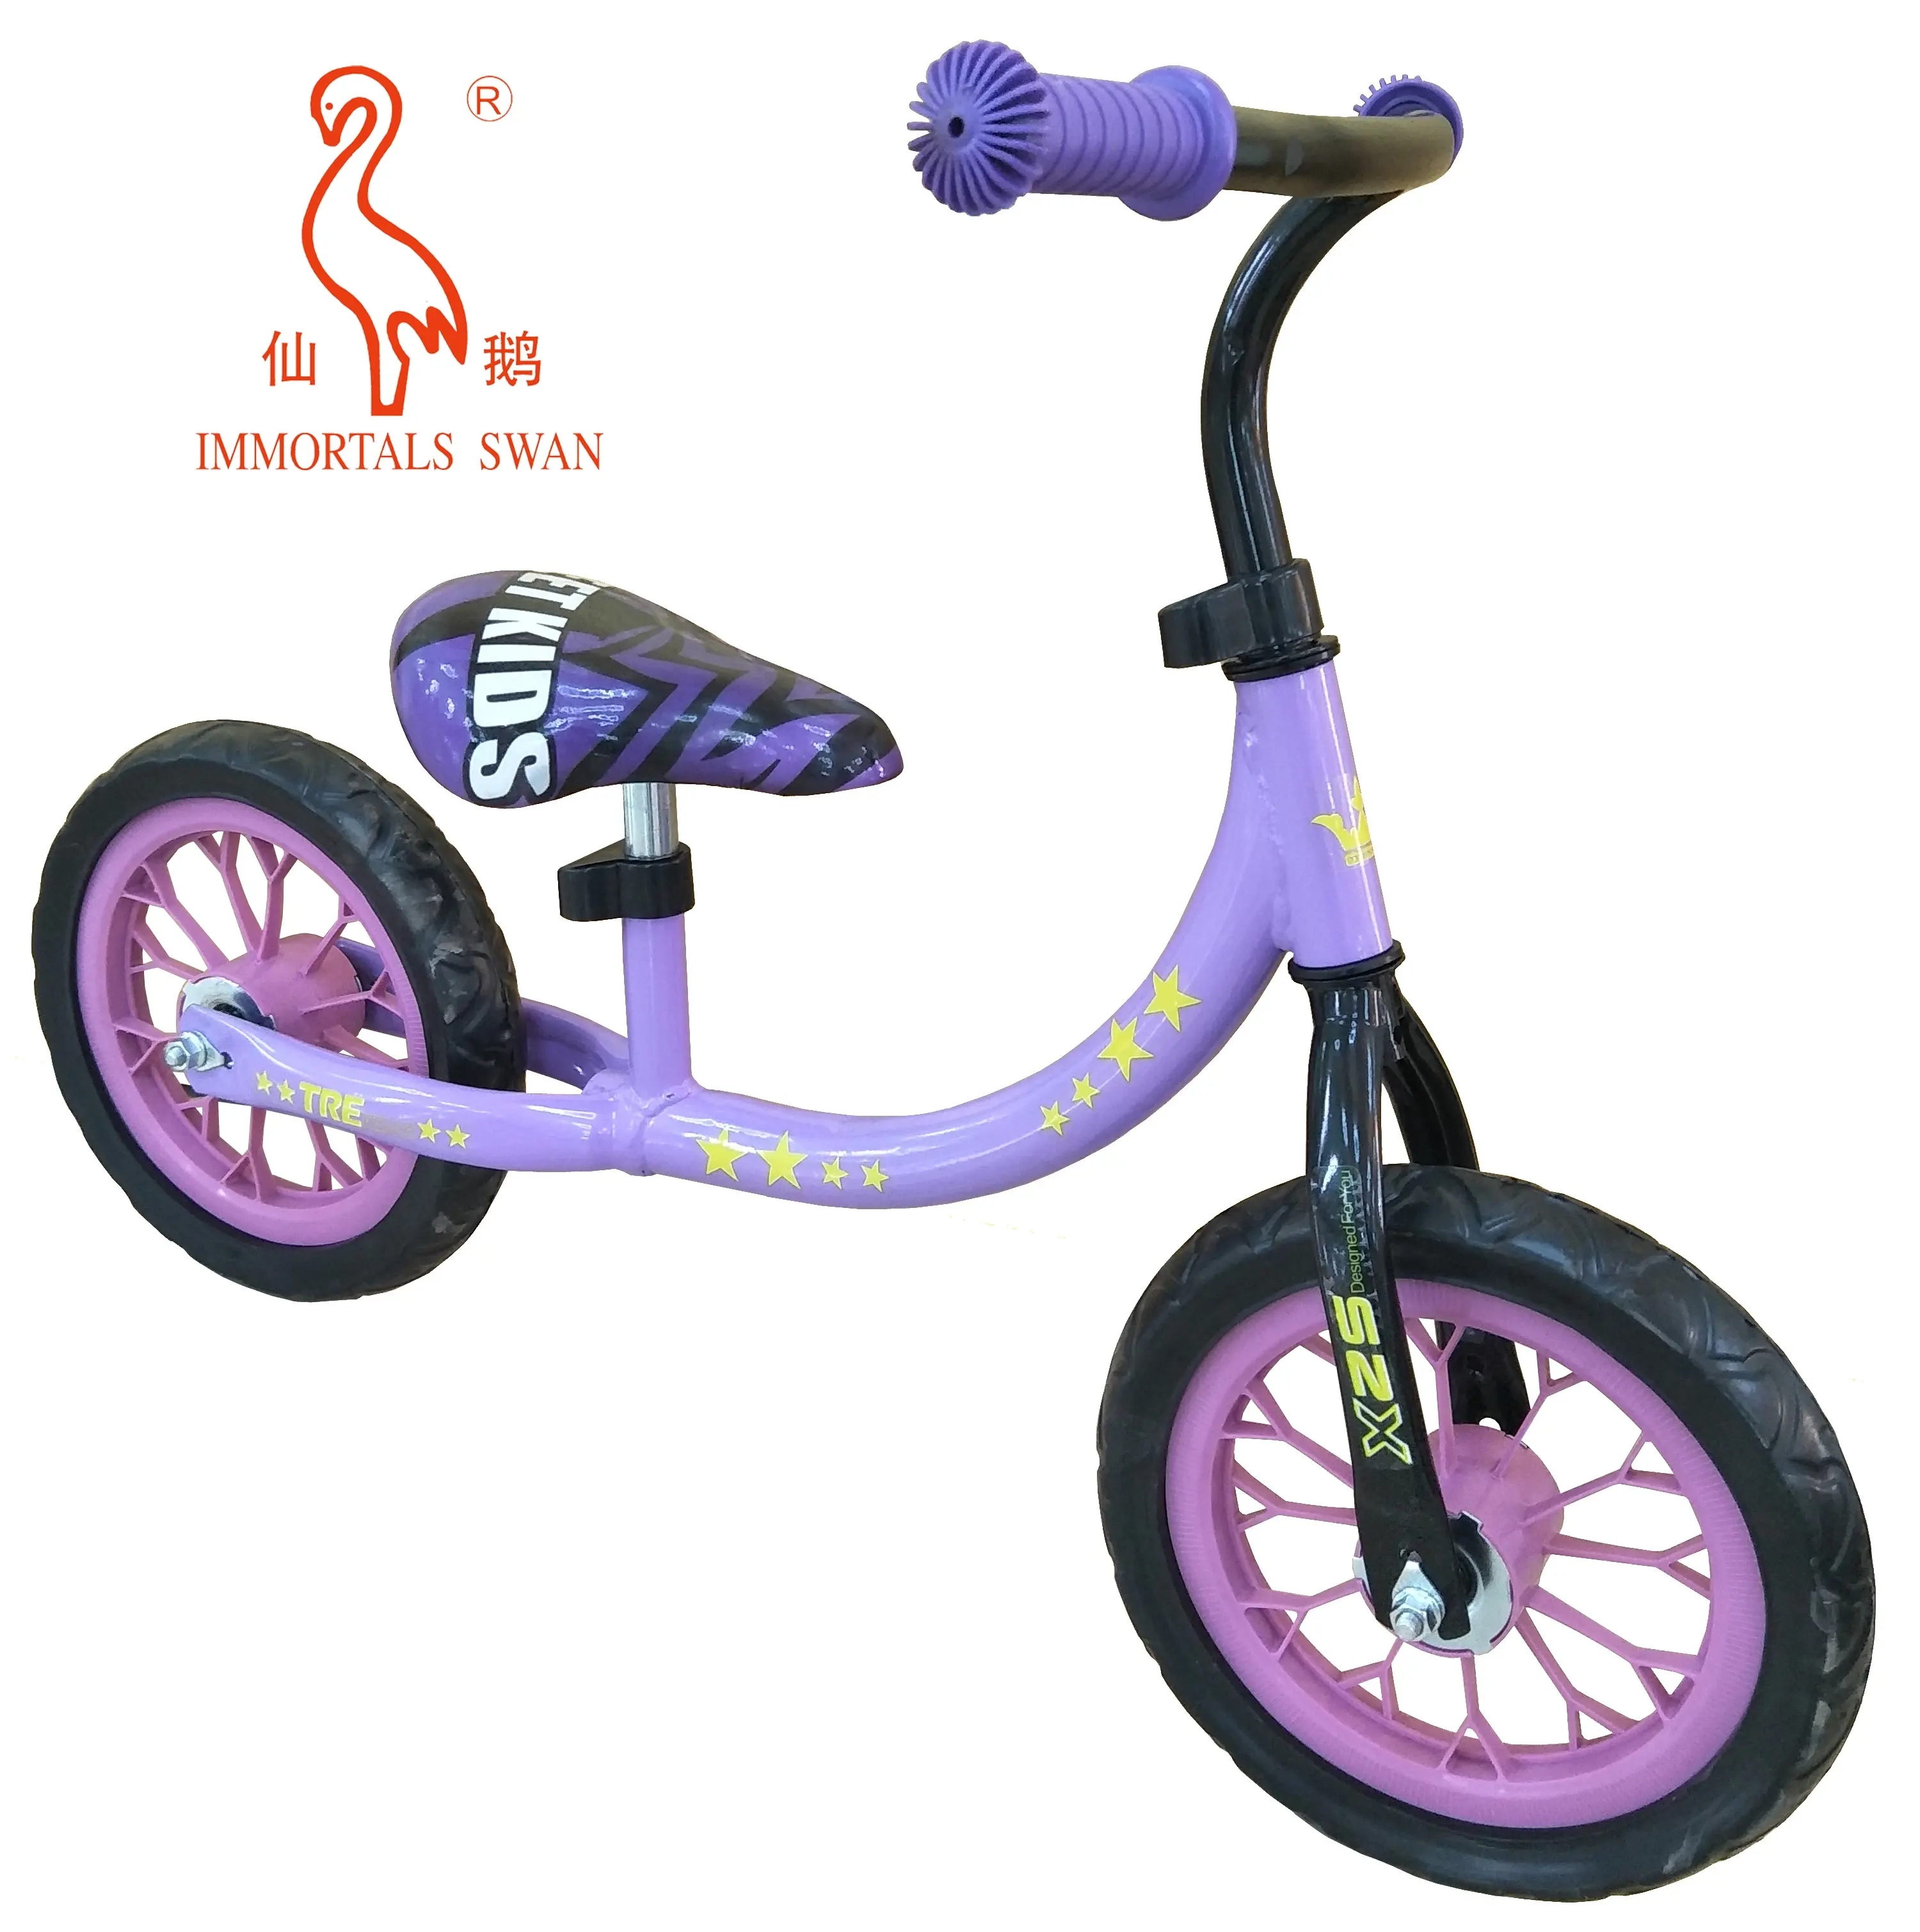 New Design 12-inch Baby Children Balance Bike Kids Riding Toys Toddler Push Bicycle For 18 Months to 5 Years Old